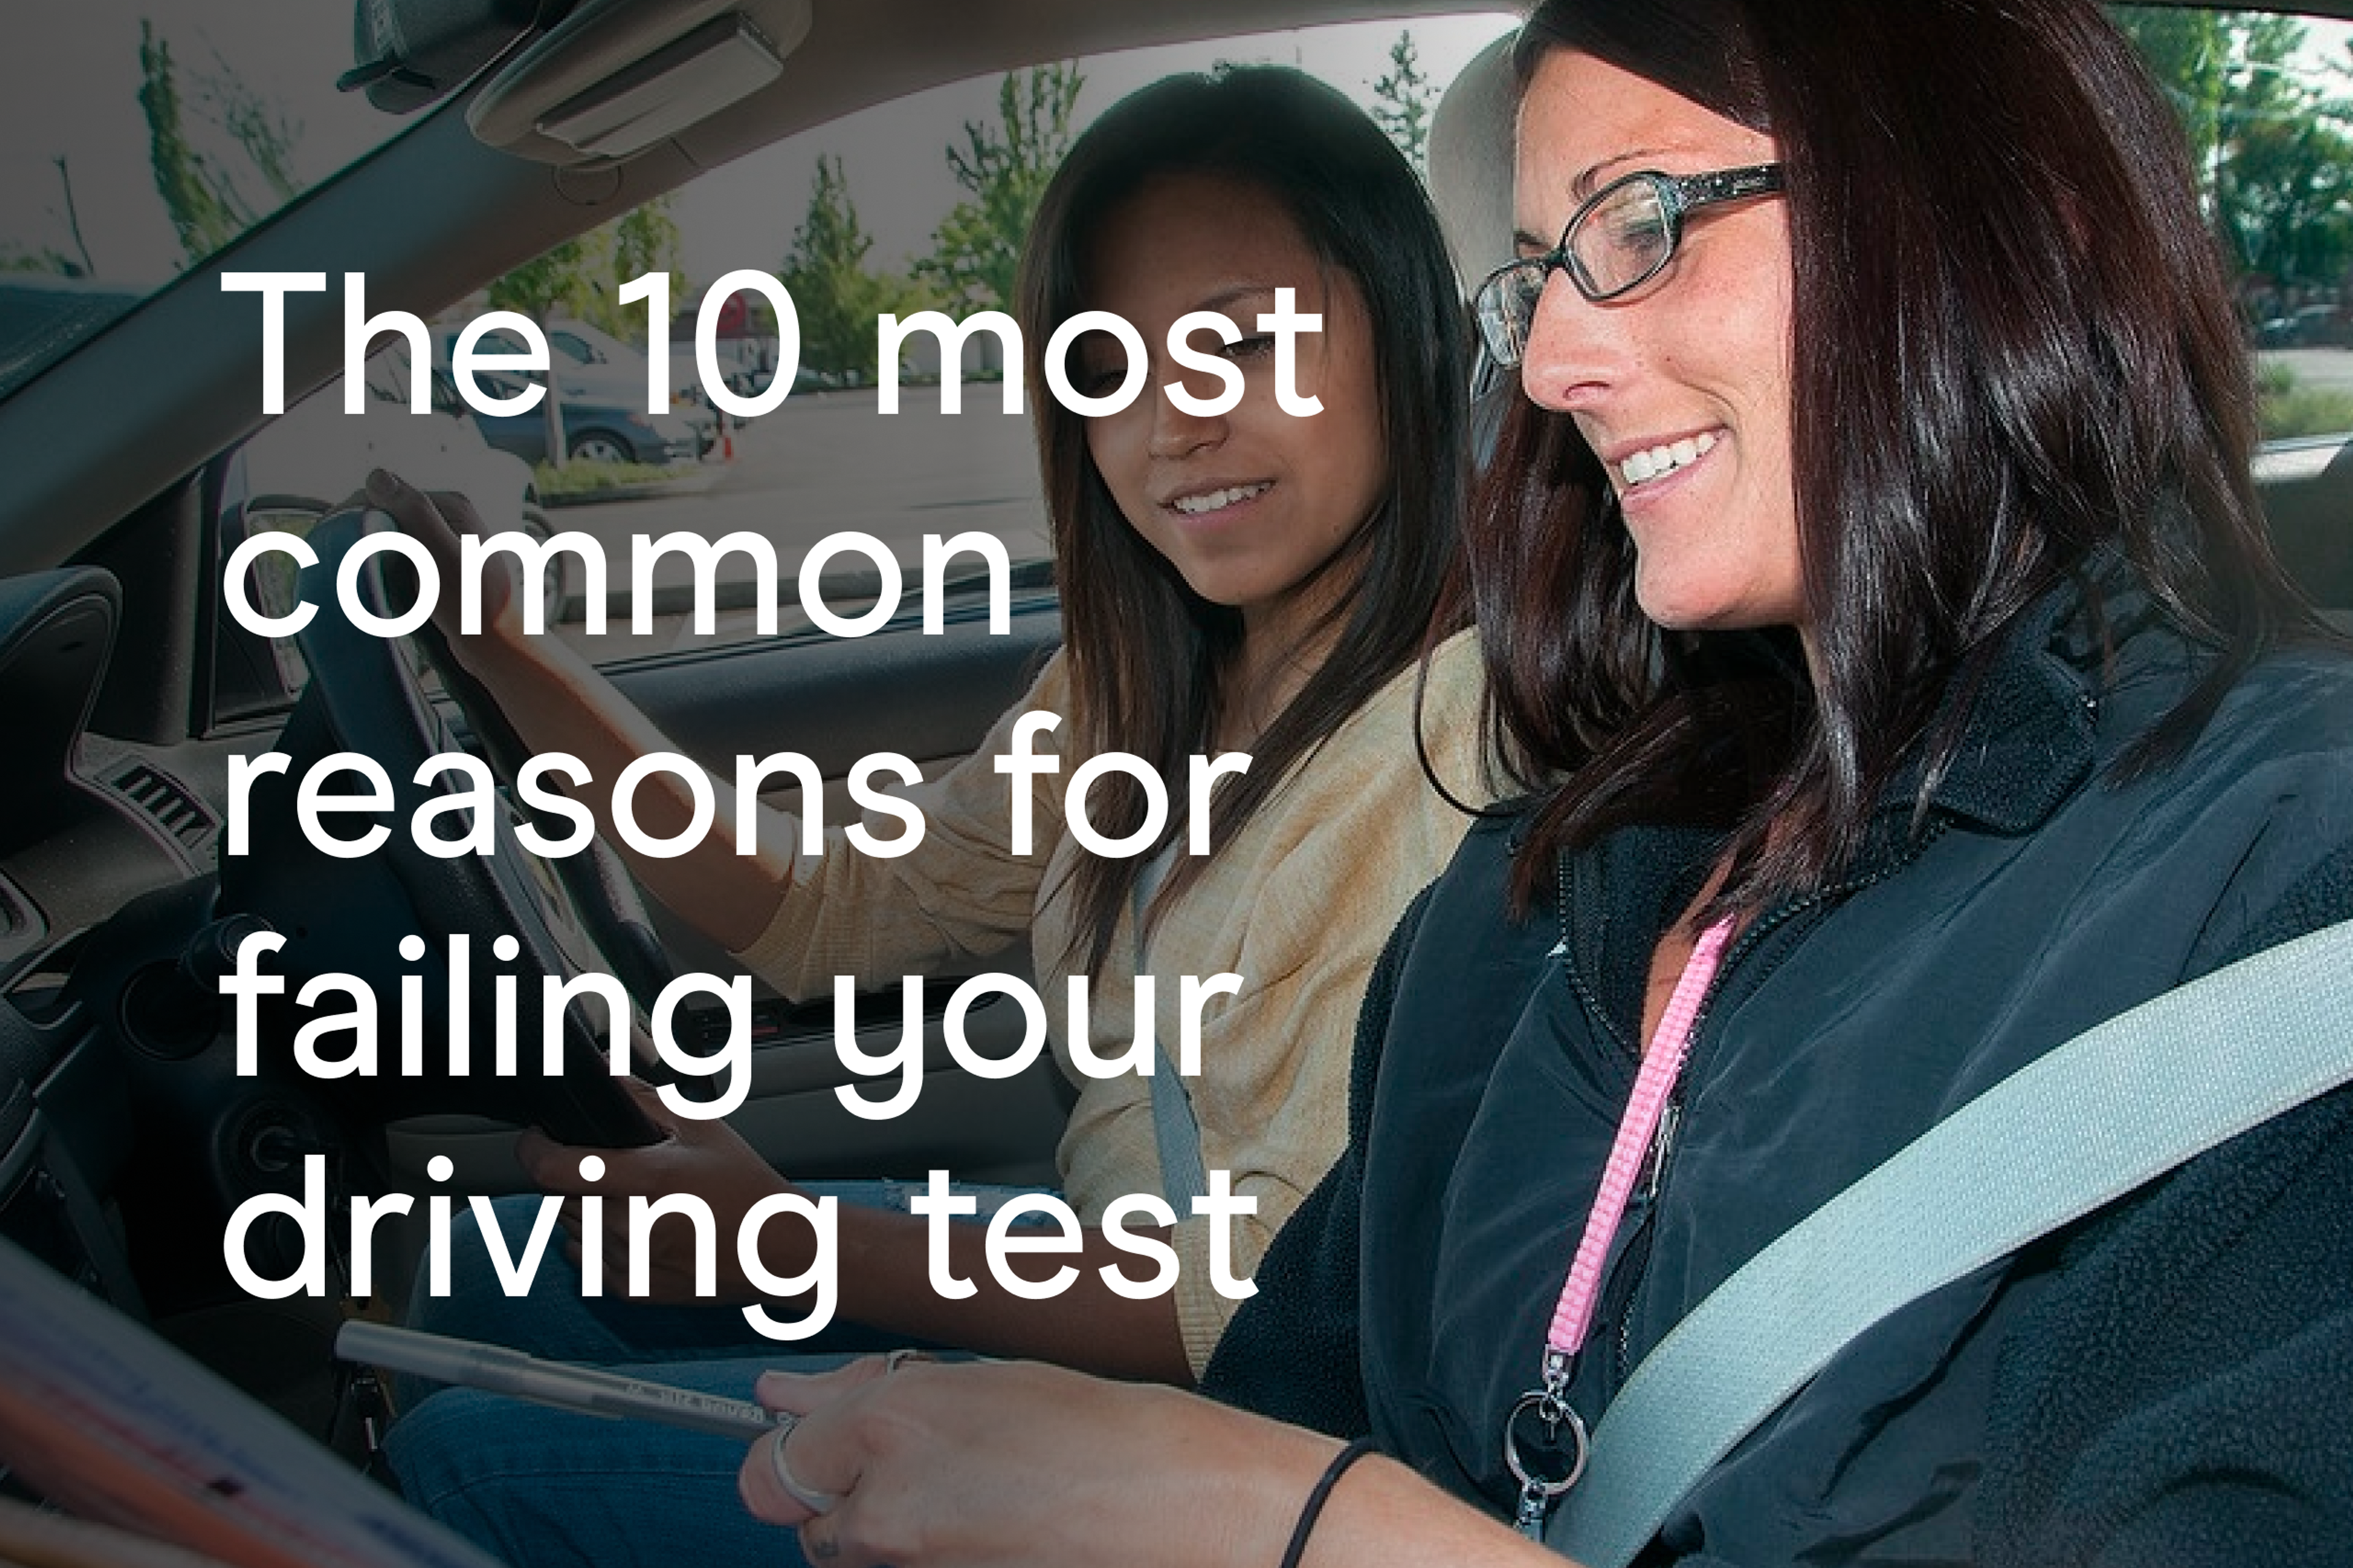 The 10 most common reasons for failing your driving test